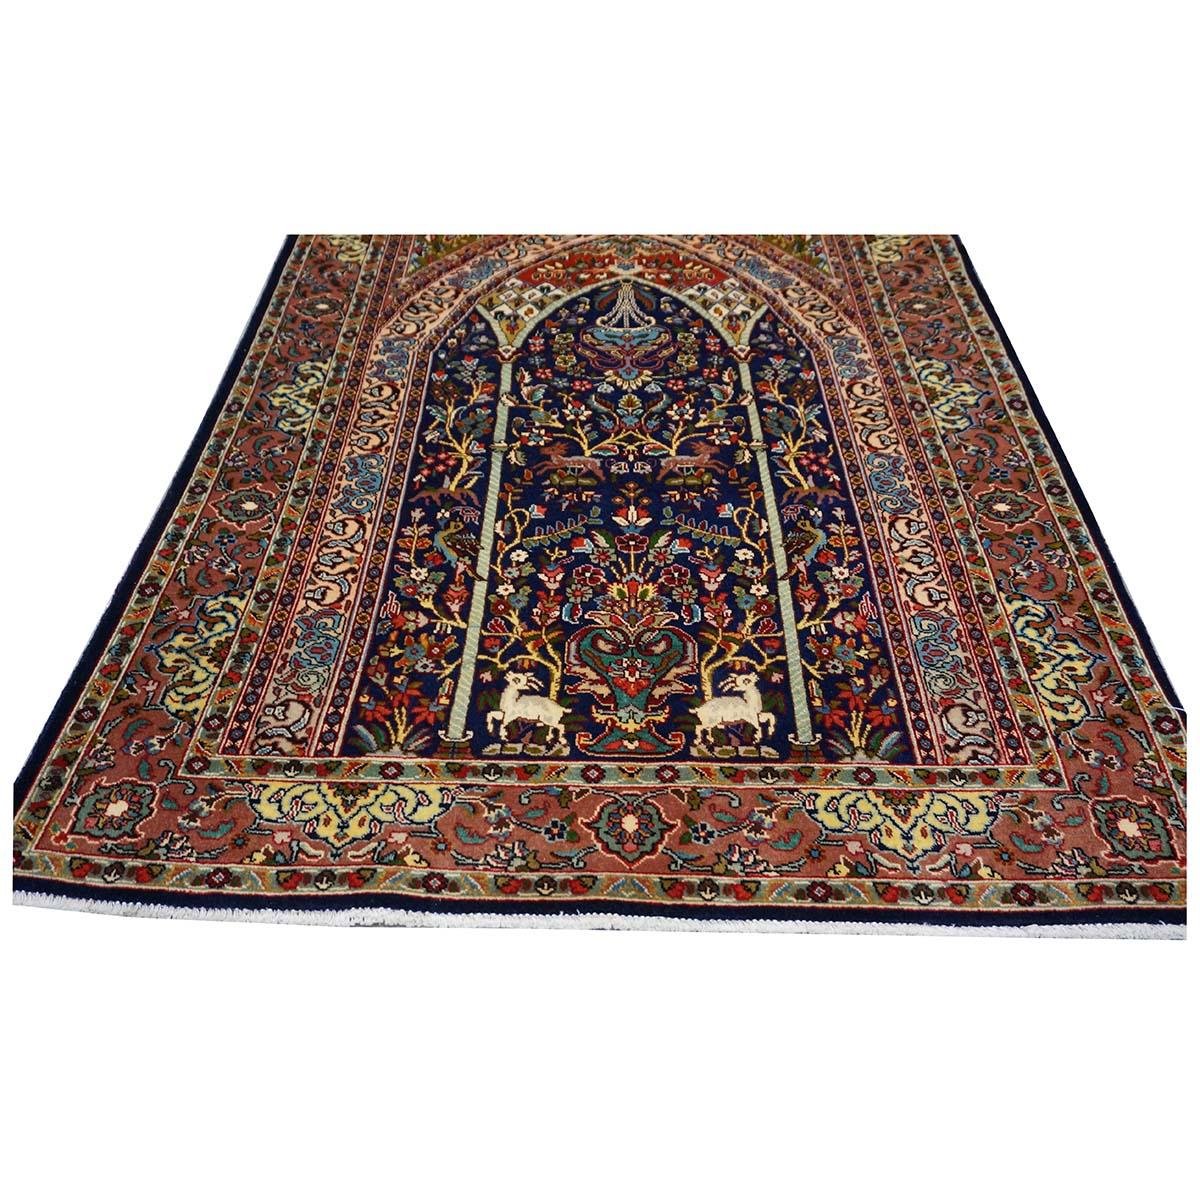 Antique Persian Tabriz 3x5 Navy & Mauve Handmade Area Rug In Excellent Condition For Sale In Houston, TX